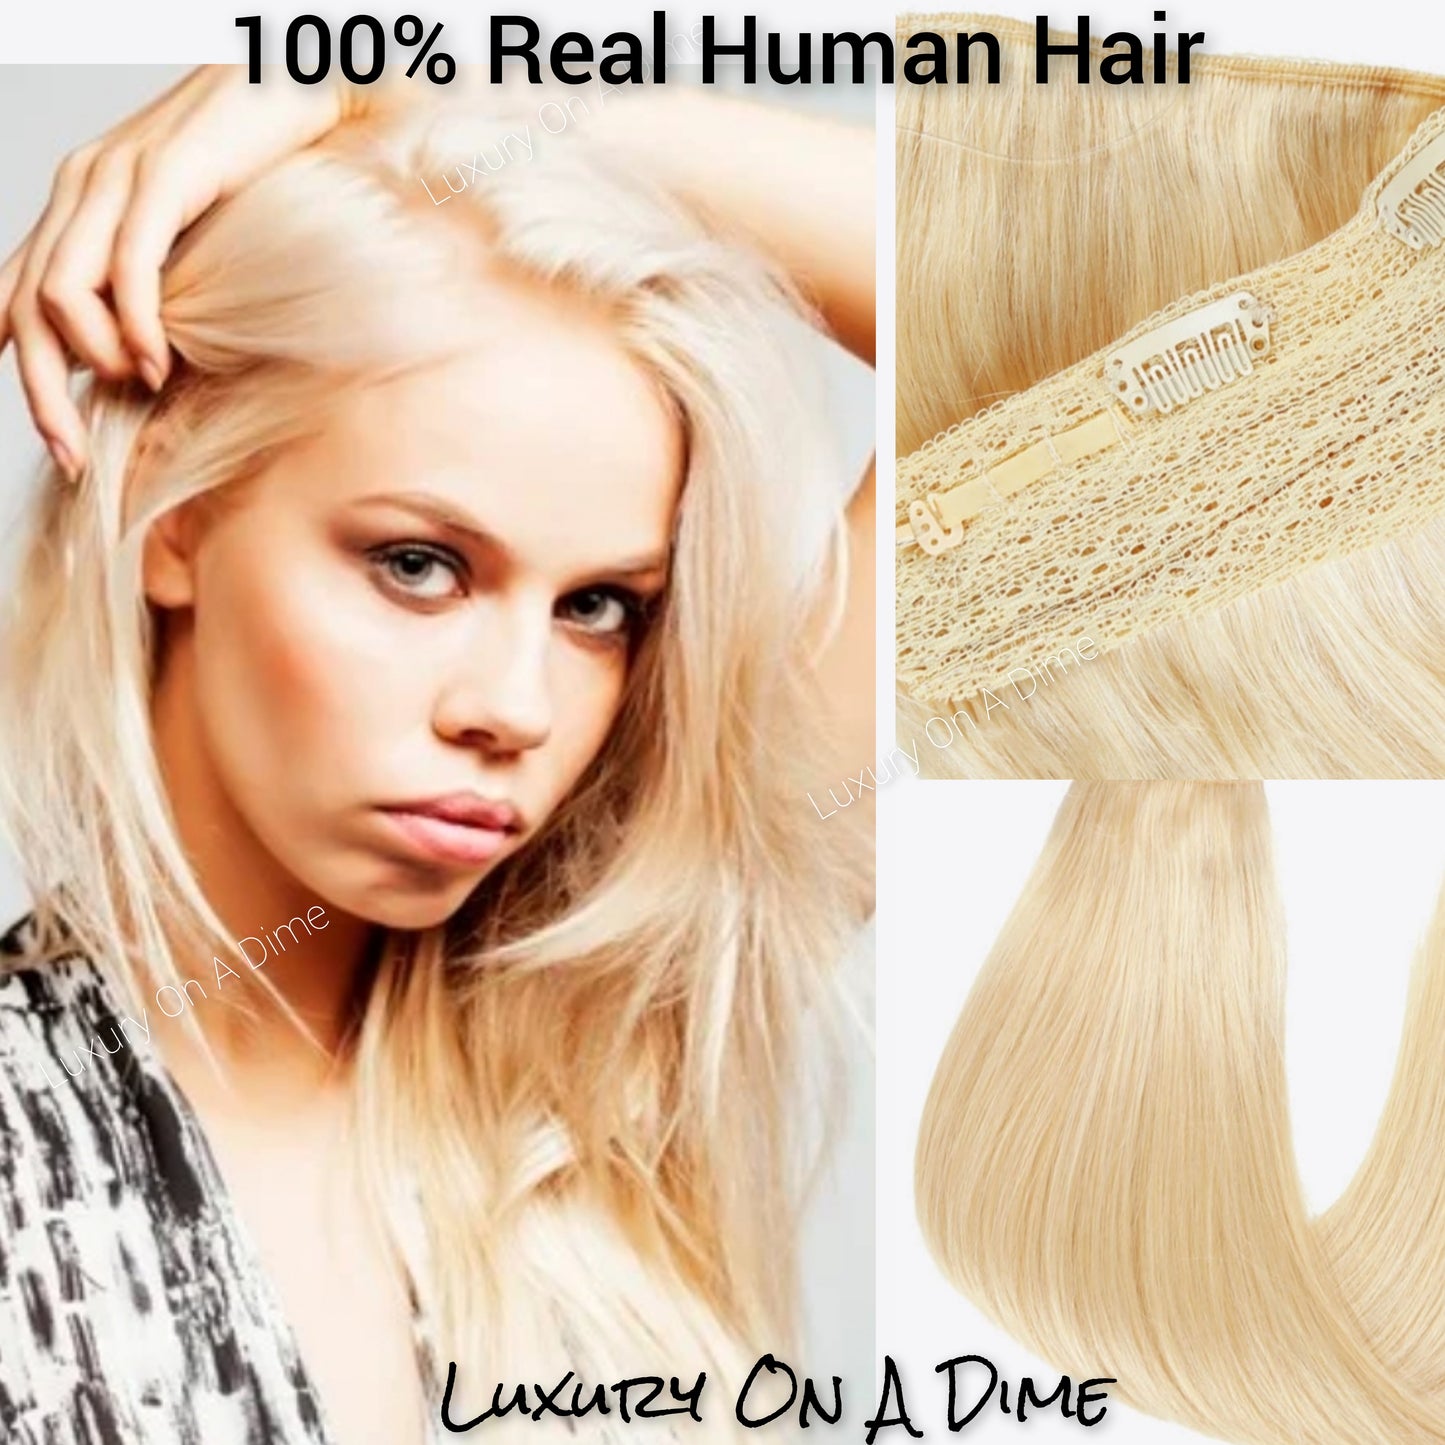 22" HUMAN INDIAN HAIR 100g Halo Extention Real Premium